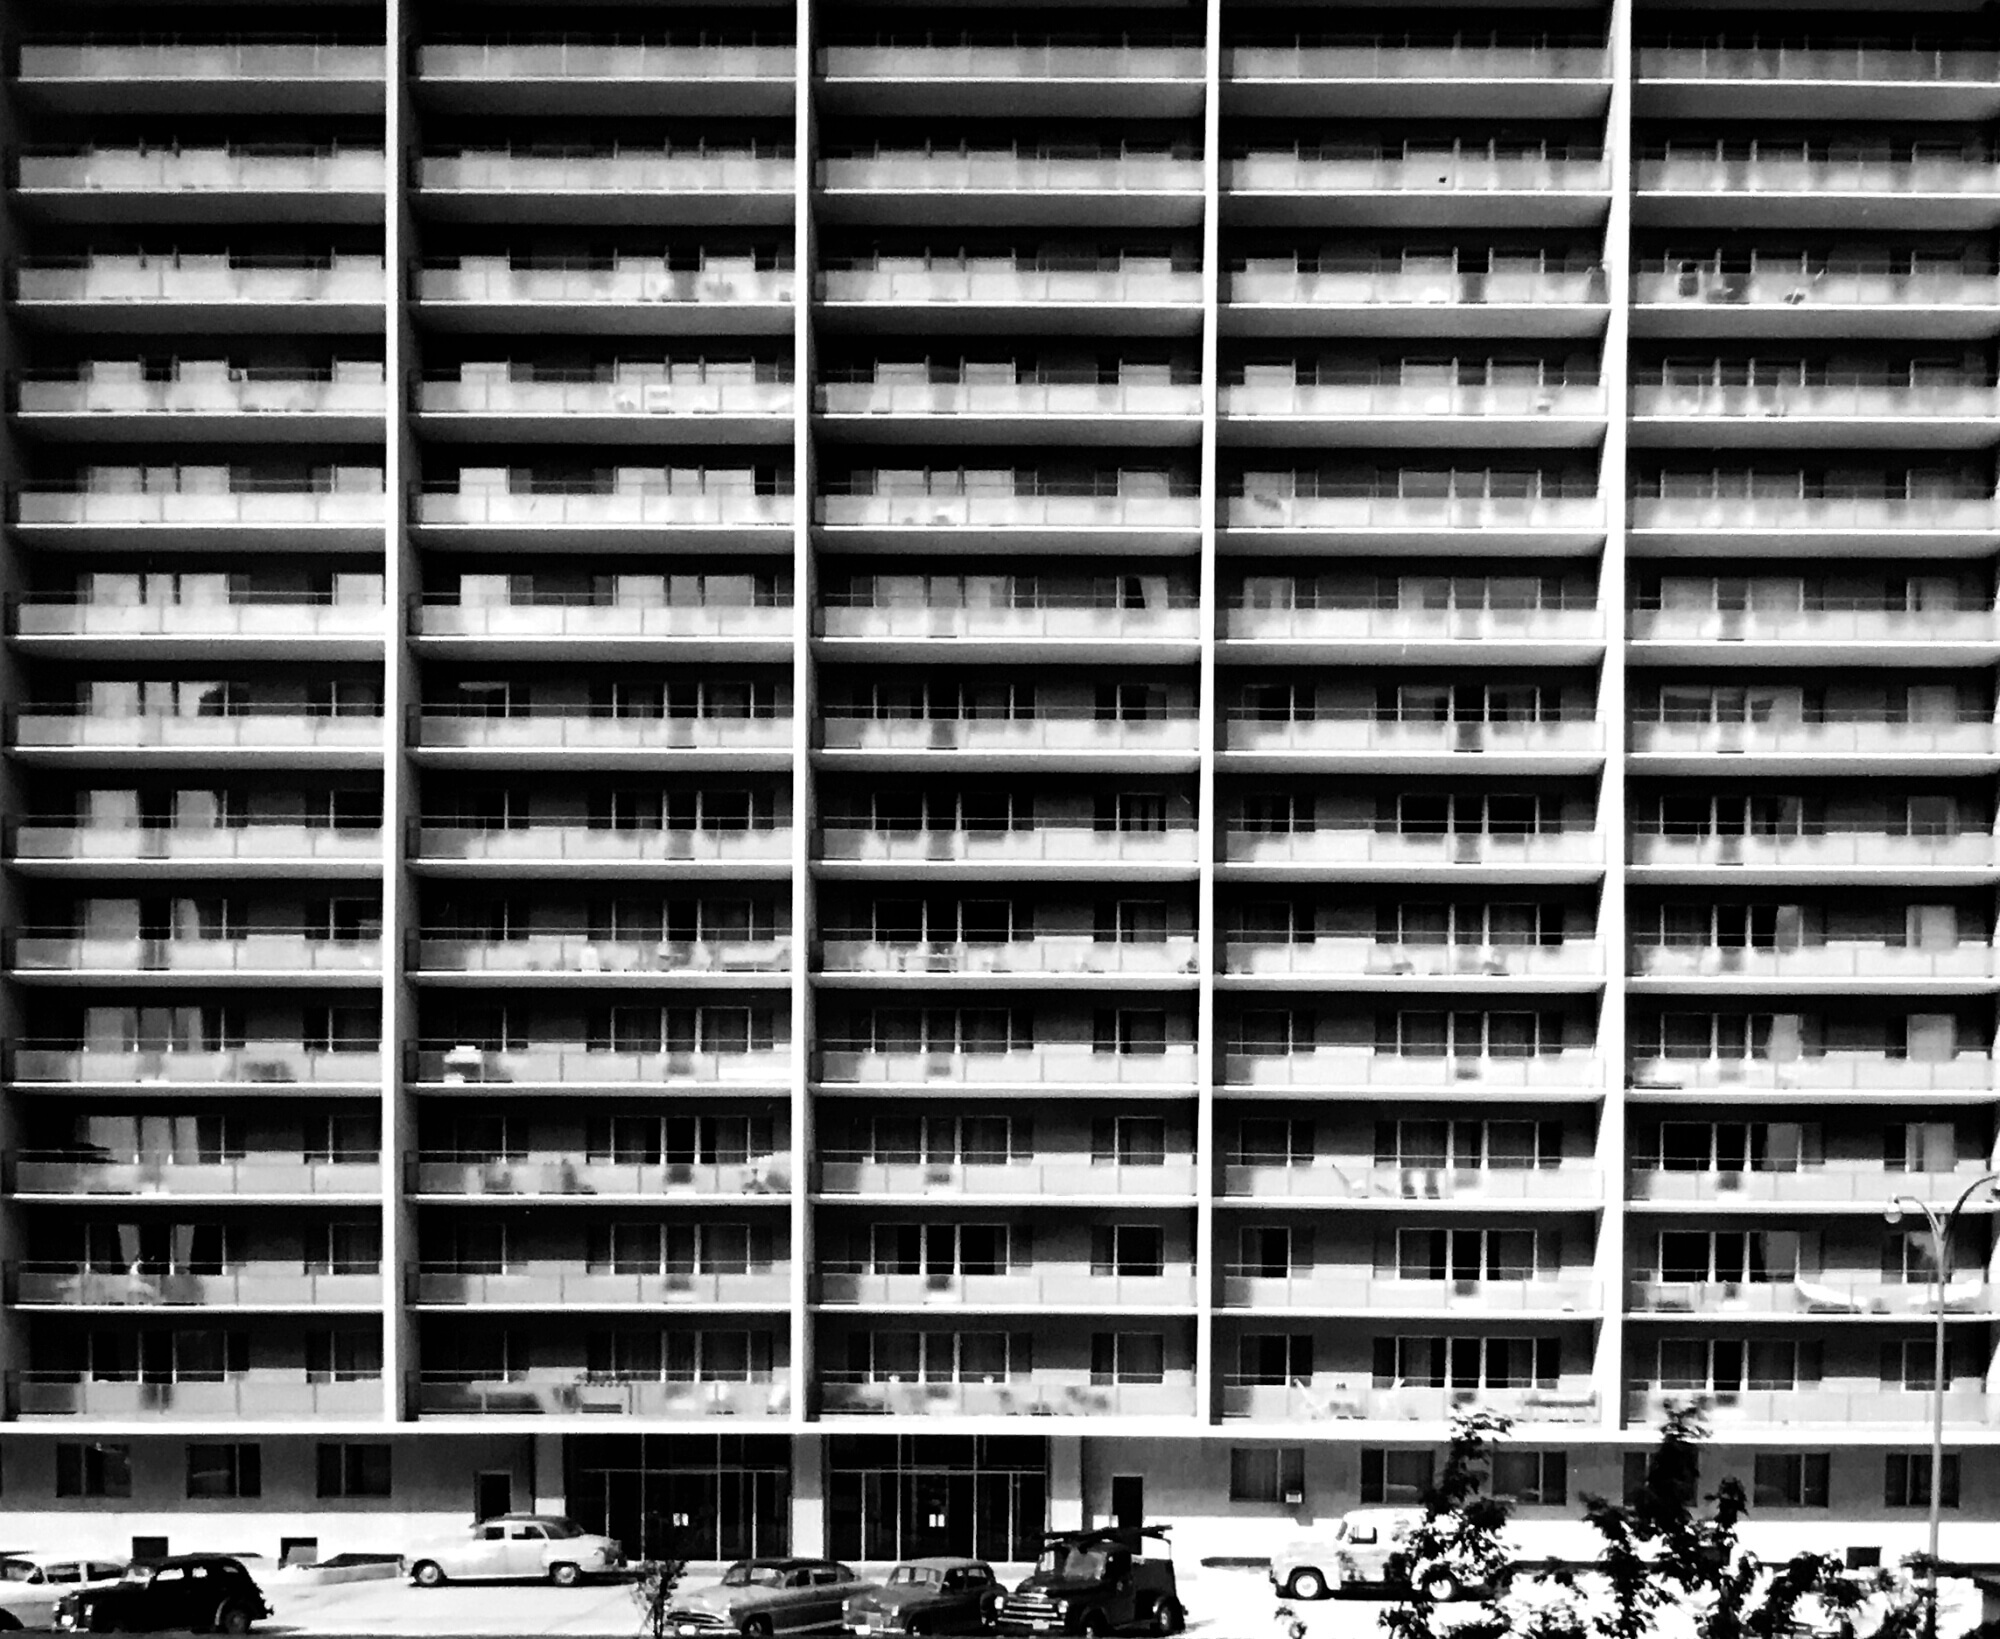 Black and white image of a 14-storey Mid-Century Modern apartment building